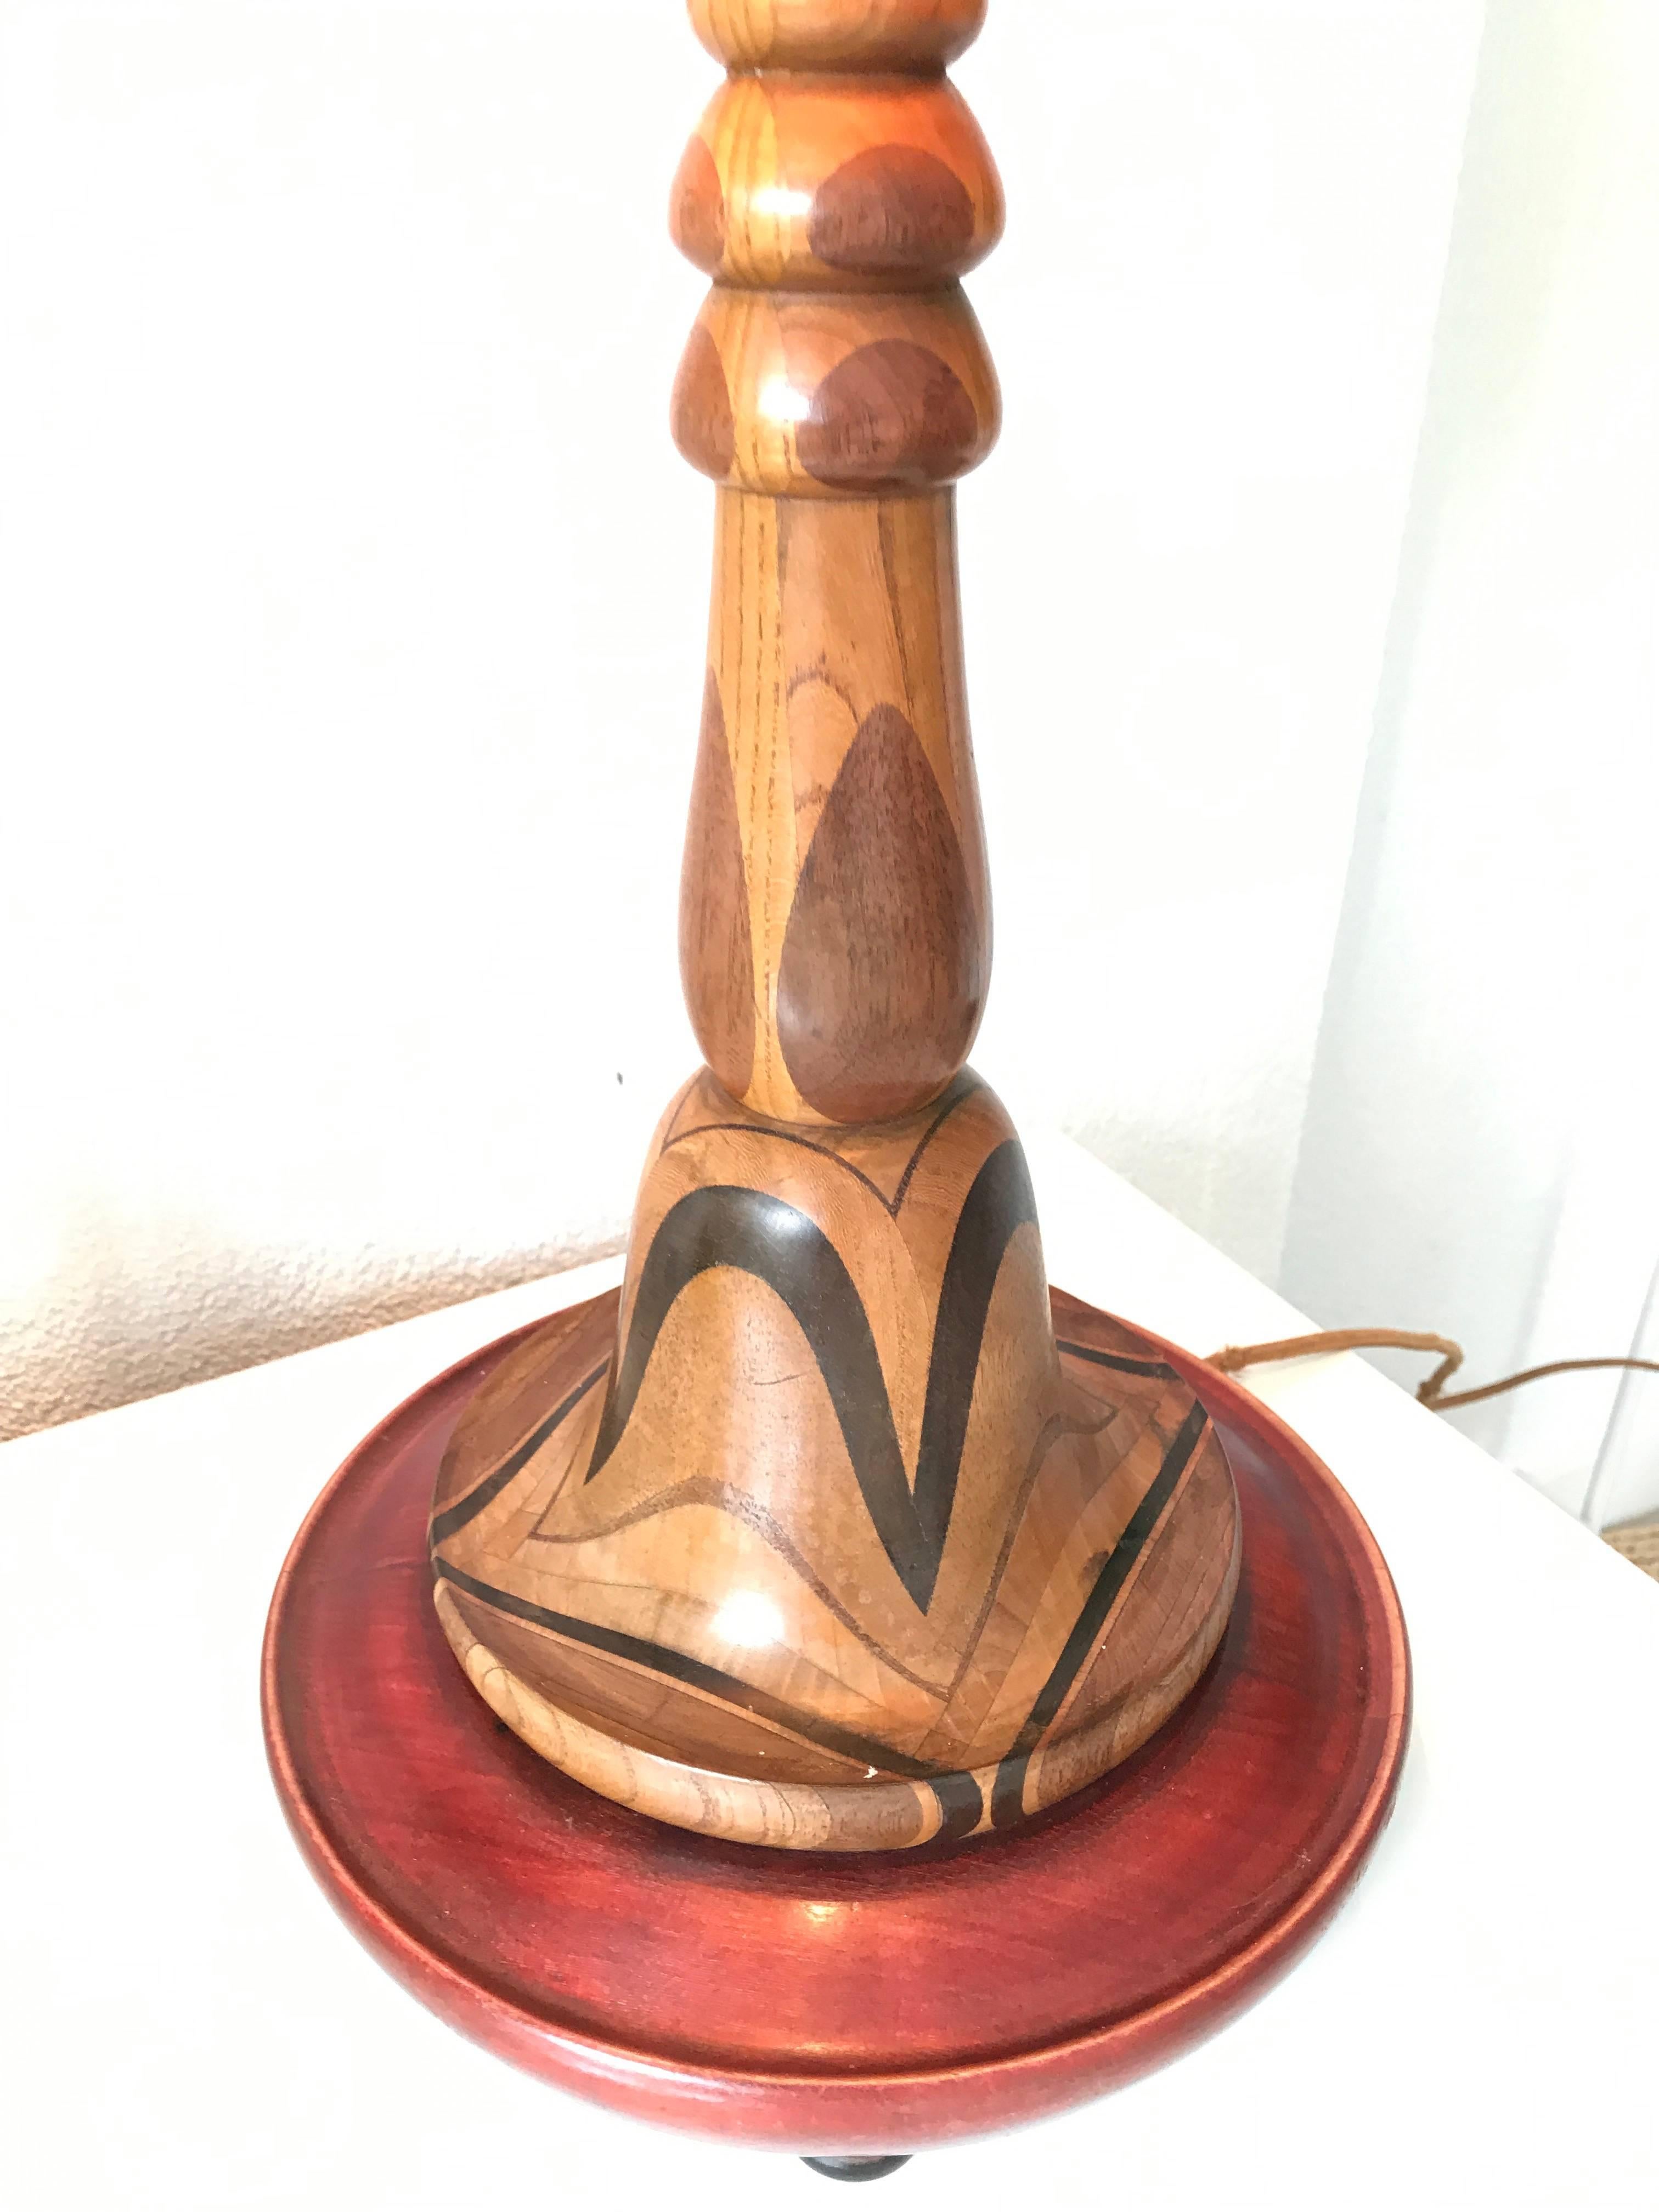 Rare and Hand-Crafted Art Deco Desk or Table Lamp with Stunning Wood Motifs In Excellent Condition For Sale In Lisse, NL